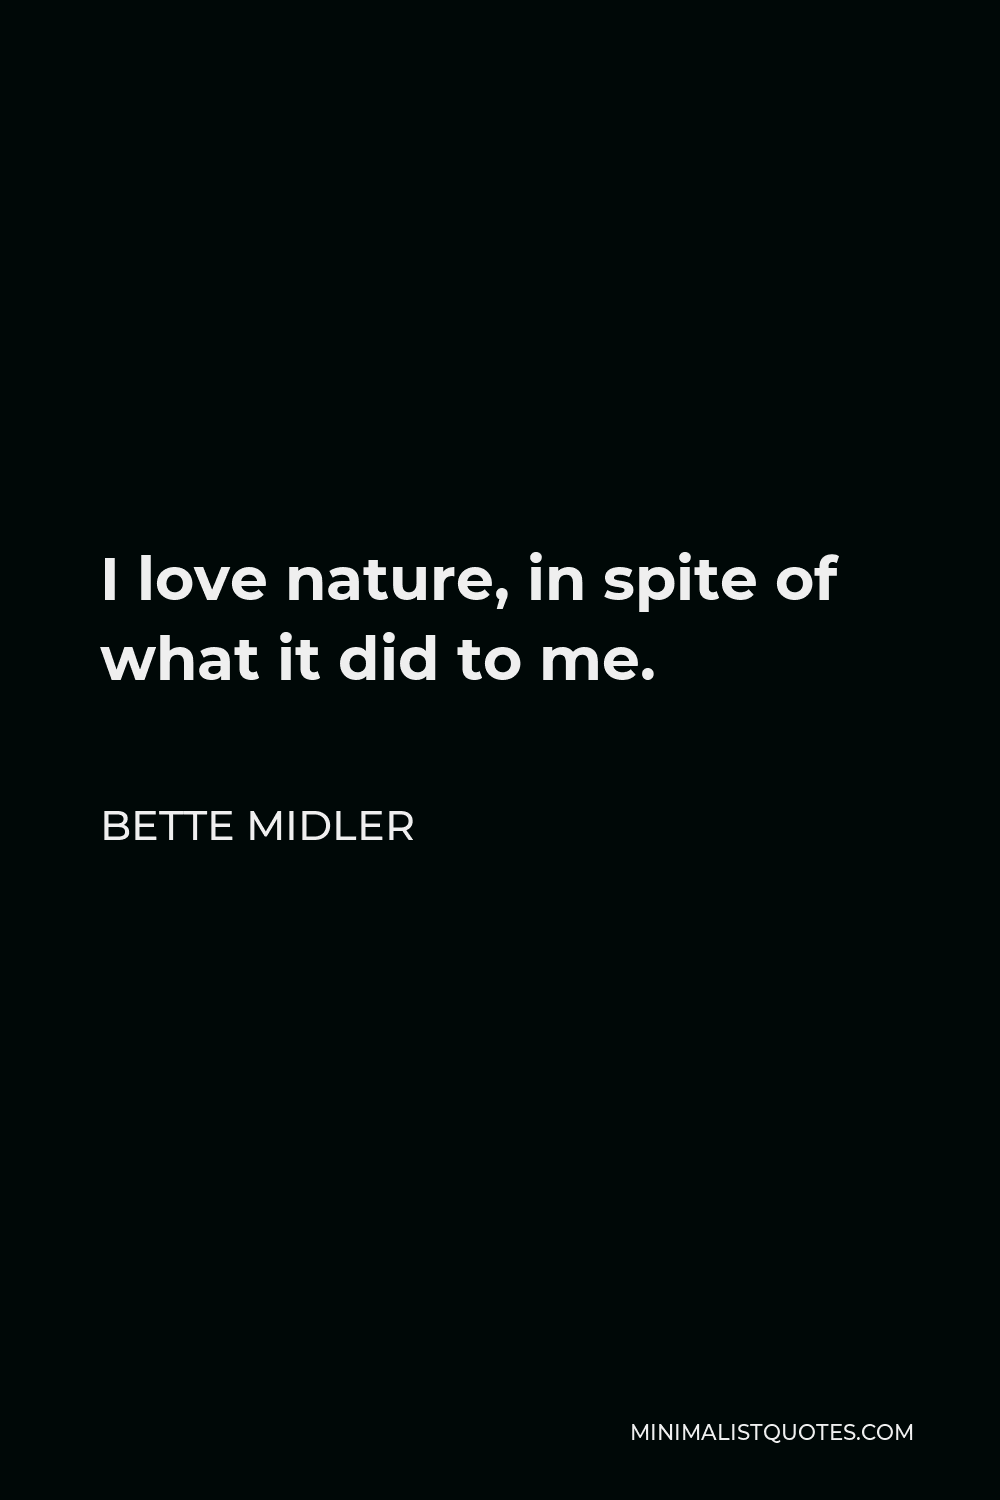 Bette Midler Quote - I love nature, in spite of what it did to me.